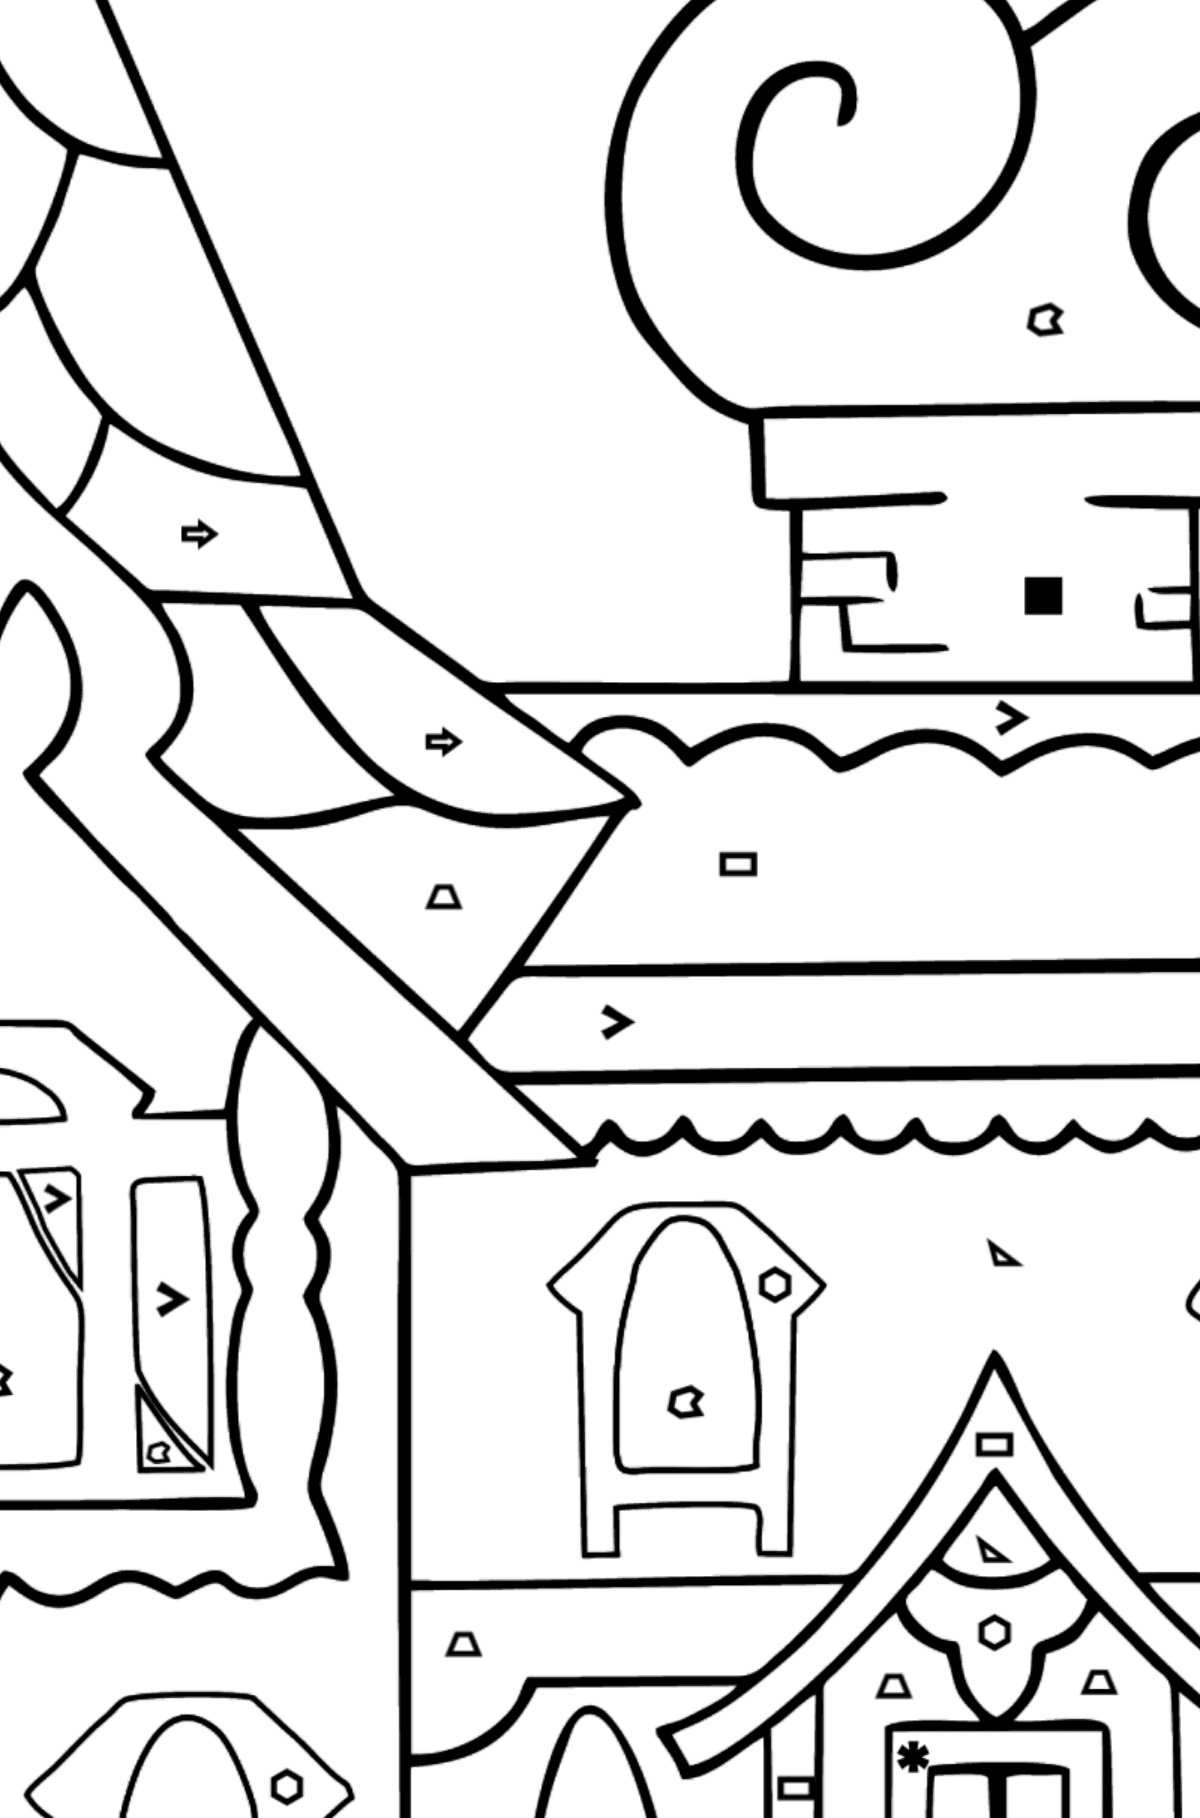 Coloring Page - A House - A Kingdom of Storytellers - Coloring by Symbols and Geometric Shapes for Kids